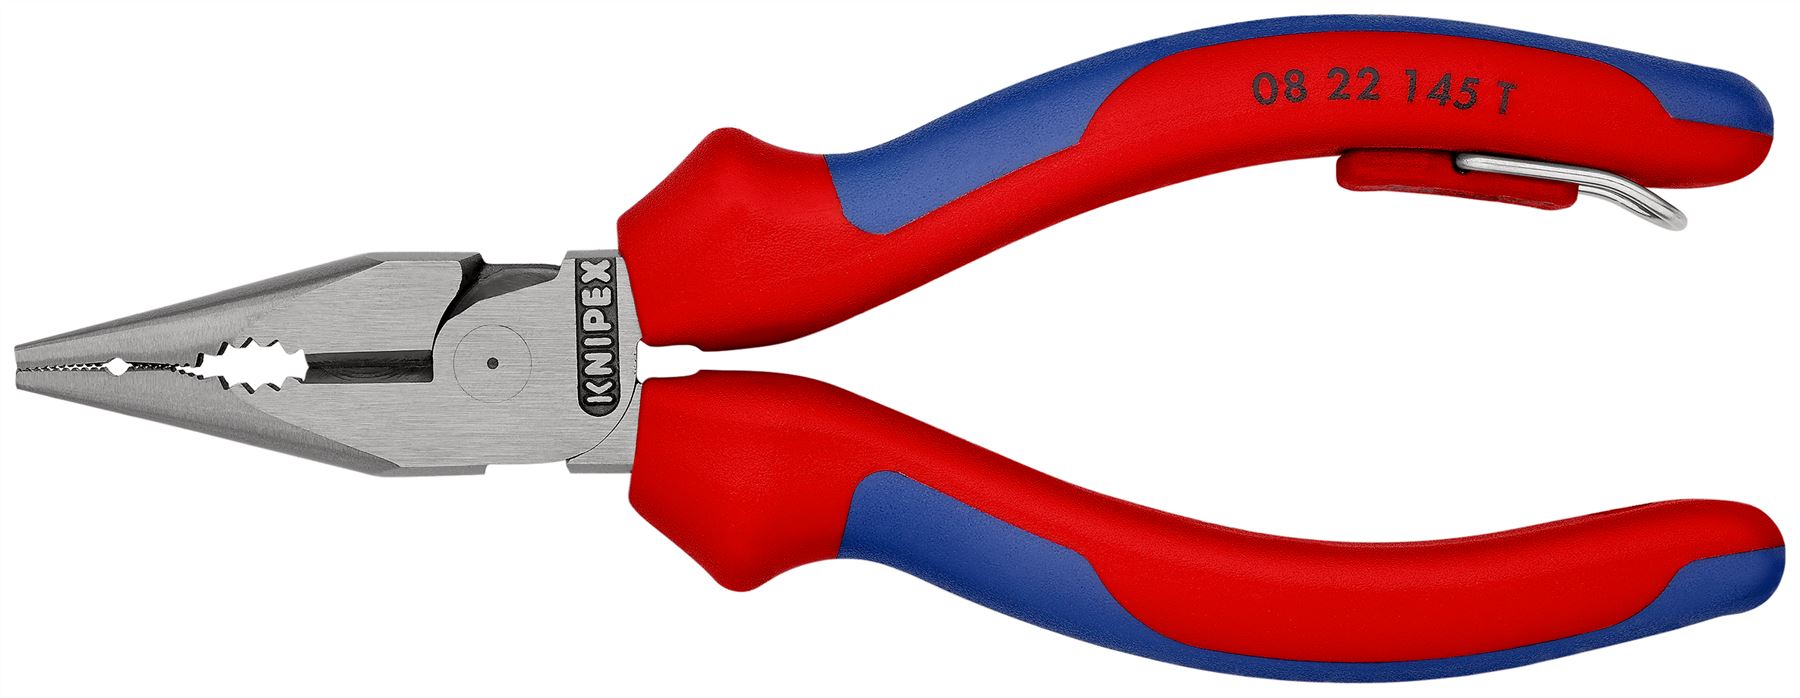 Knipex Needle Nose Combination Pliers 145mm Multi Component Grips with Tether Point 08 22 145 T